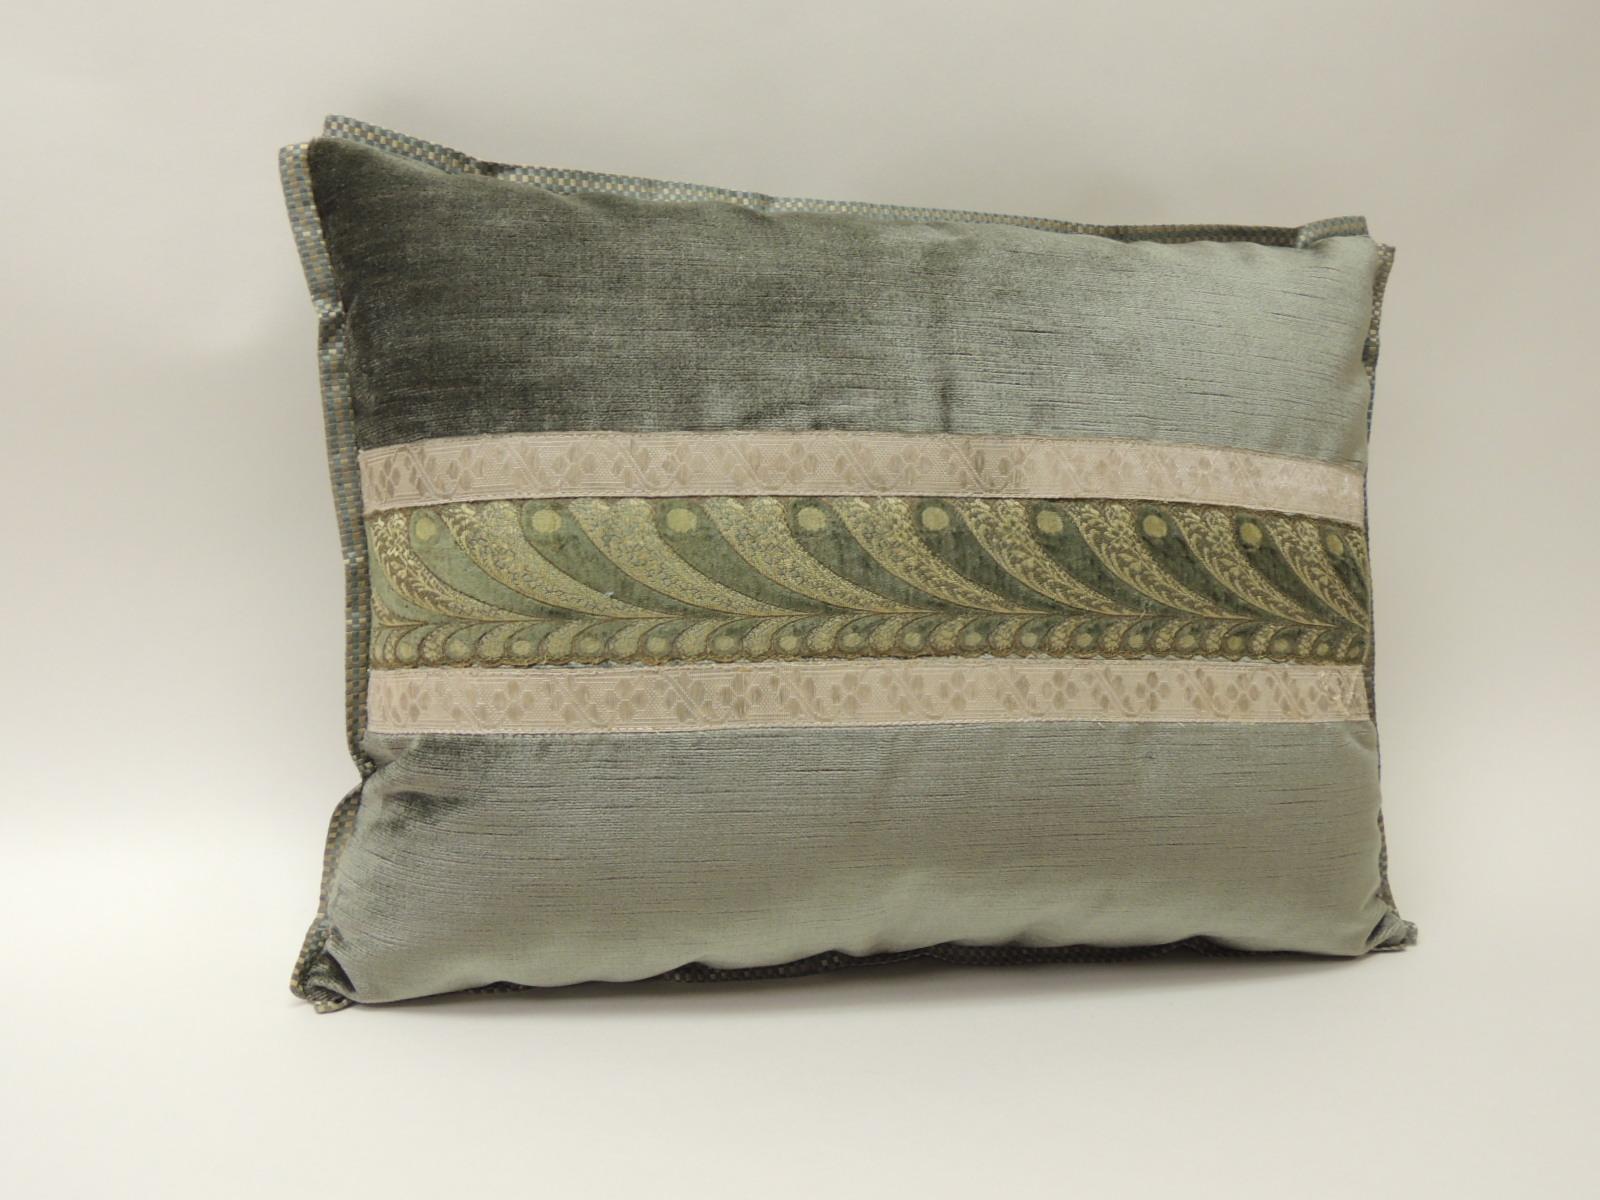 19th century green and silver antique velvet ribbon decorative bolster pillow
19th century green and silver decorative bolster pillow with antique ribbon. Decorative bolster pillow embellished with an antique woven and embroidery velvet French